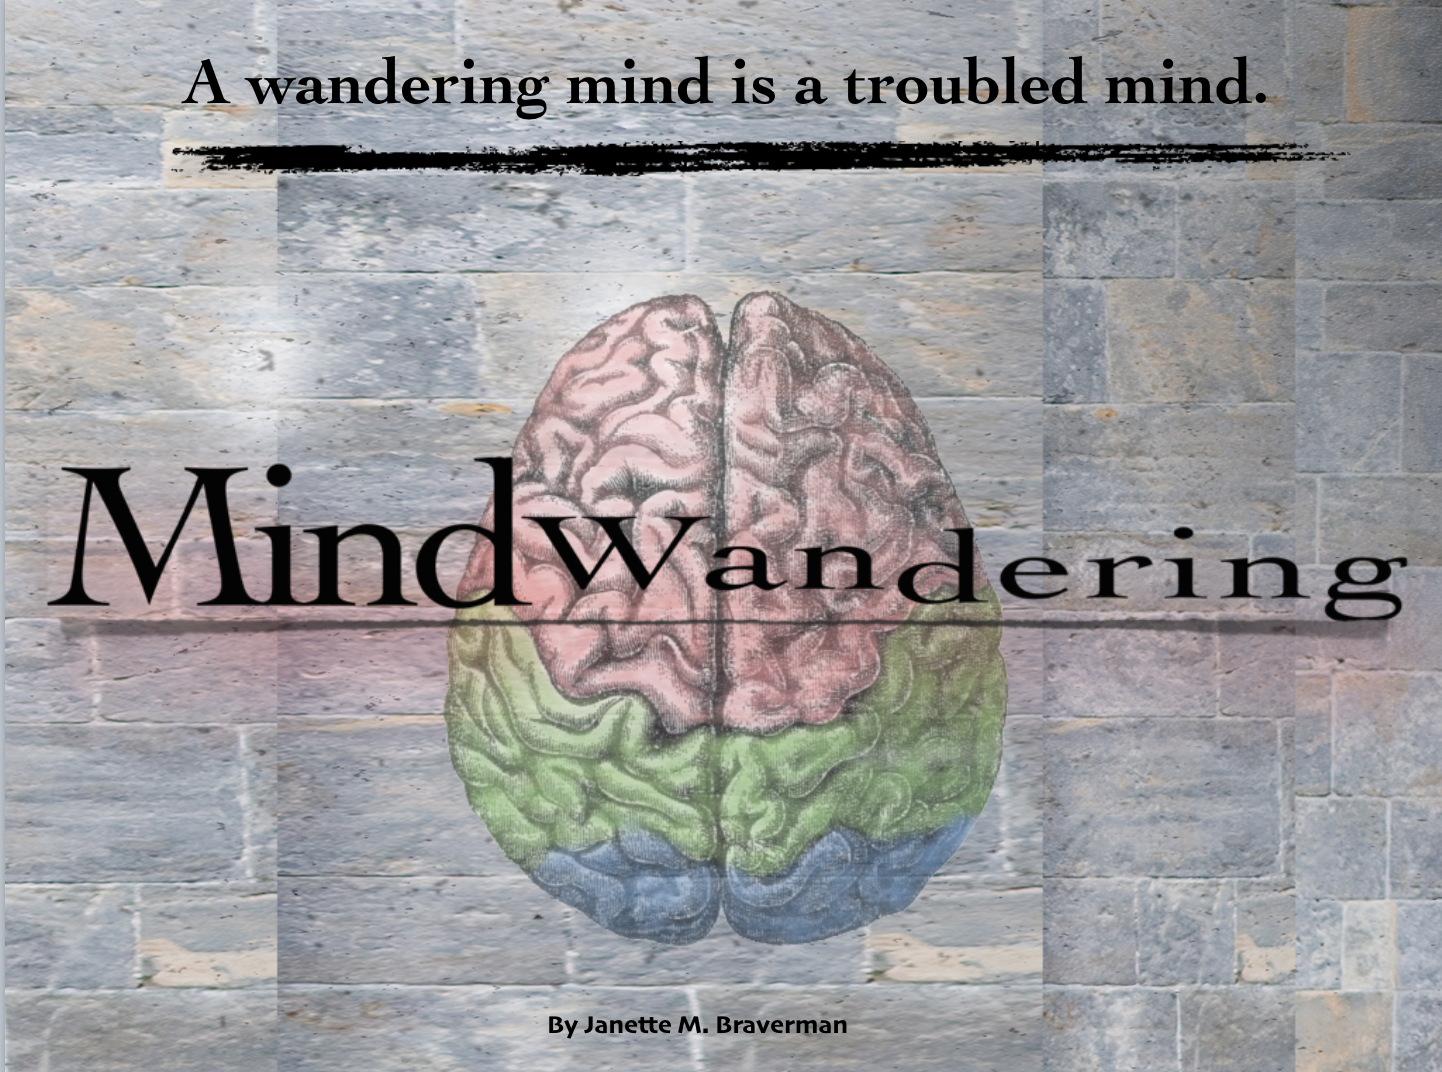 how a wandering mind